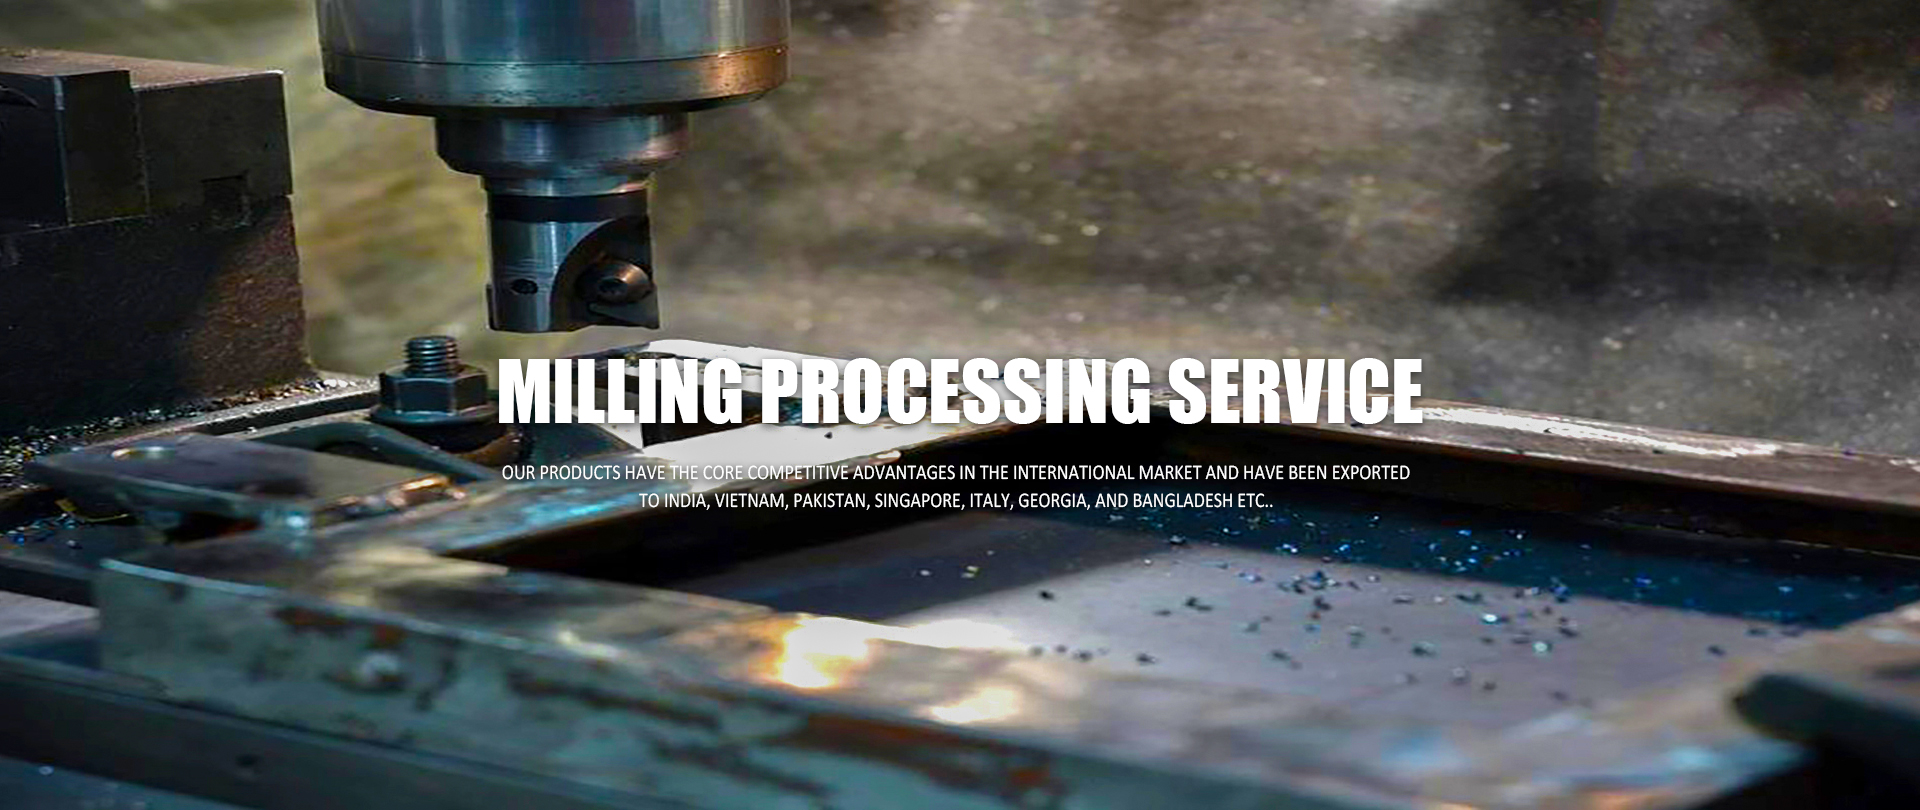 AHL STEEL Milling Processing Service